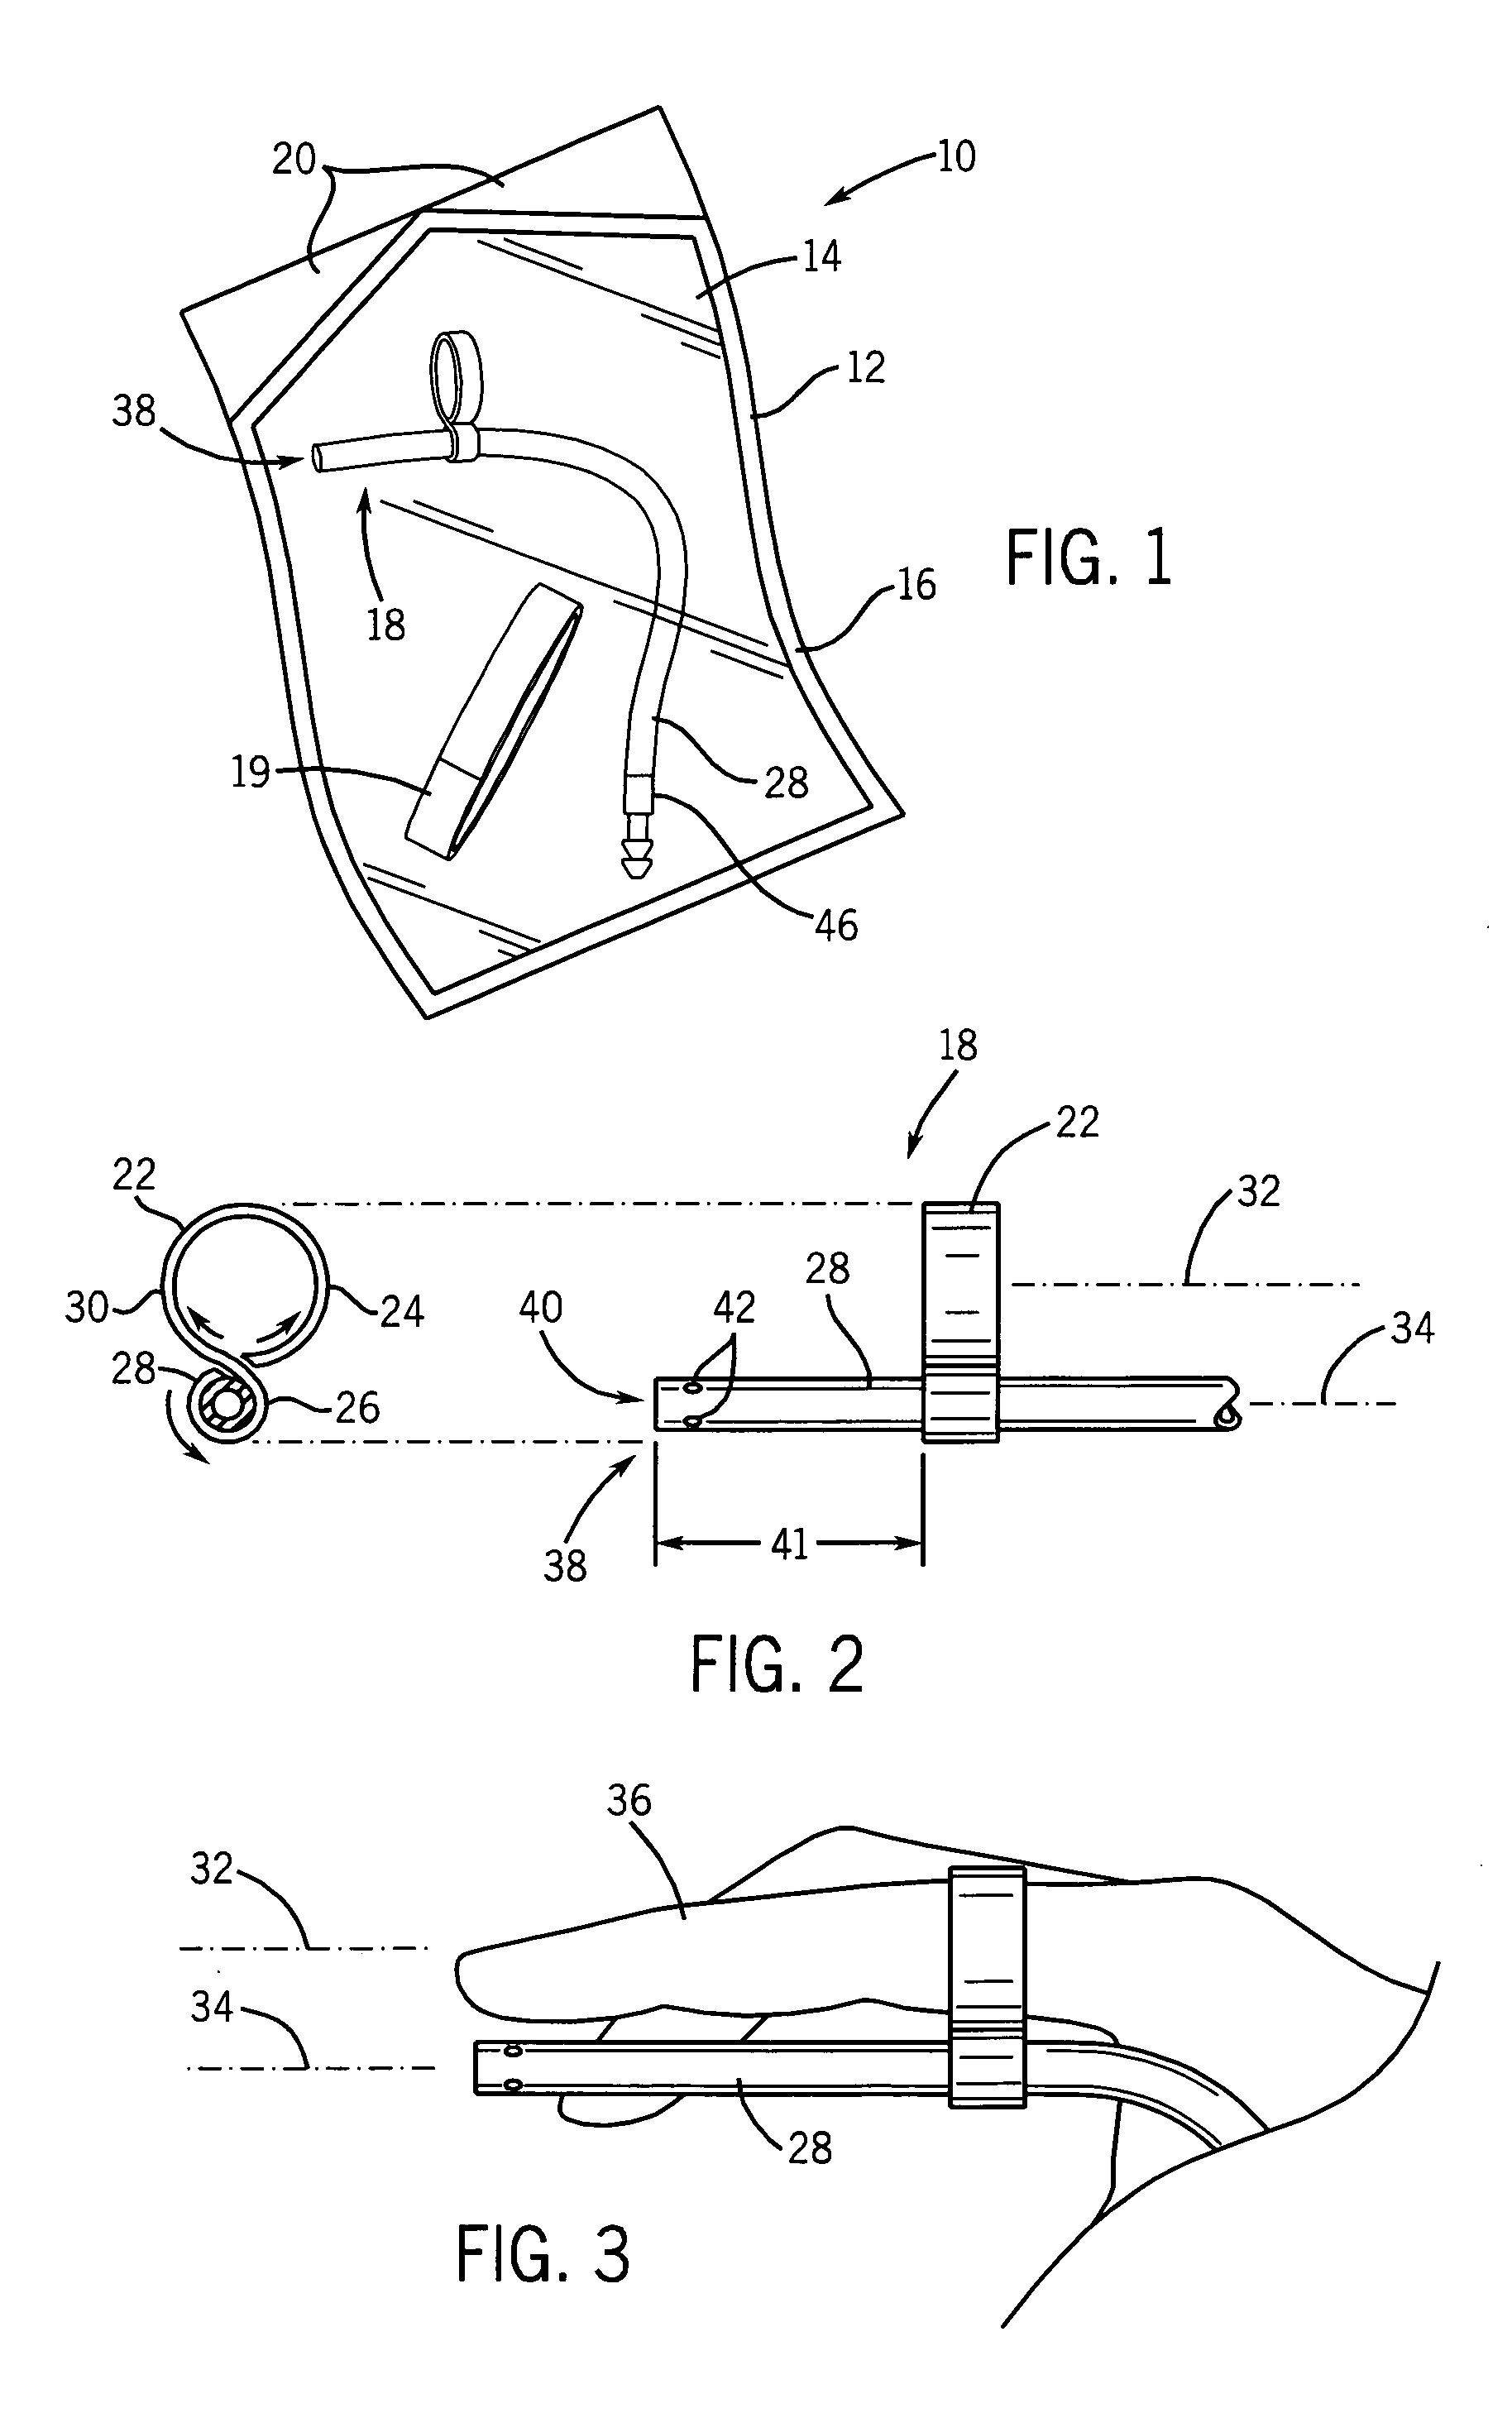 Hand mounted surgical aspiration device